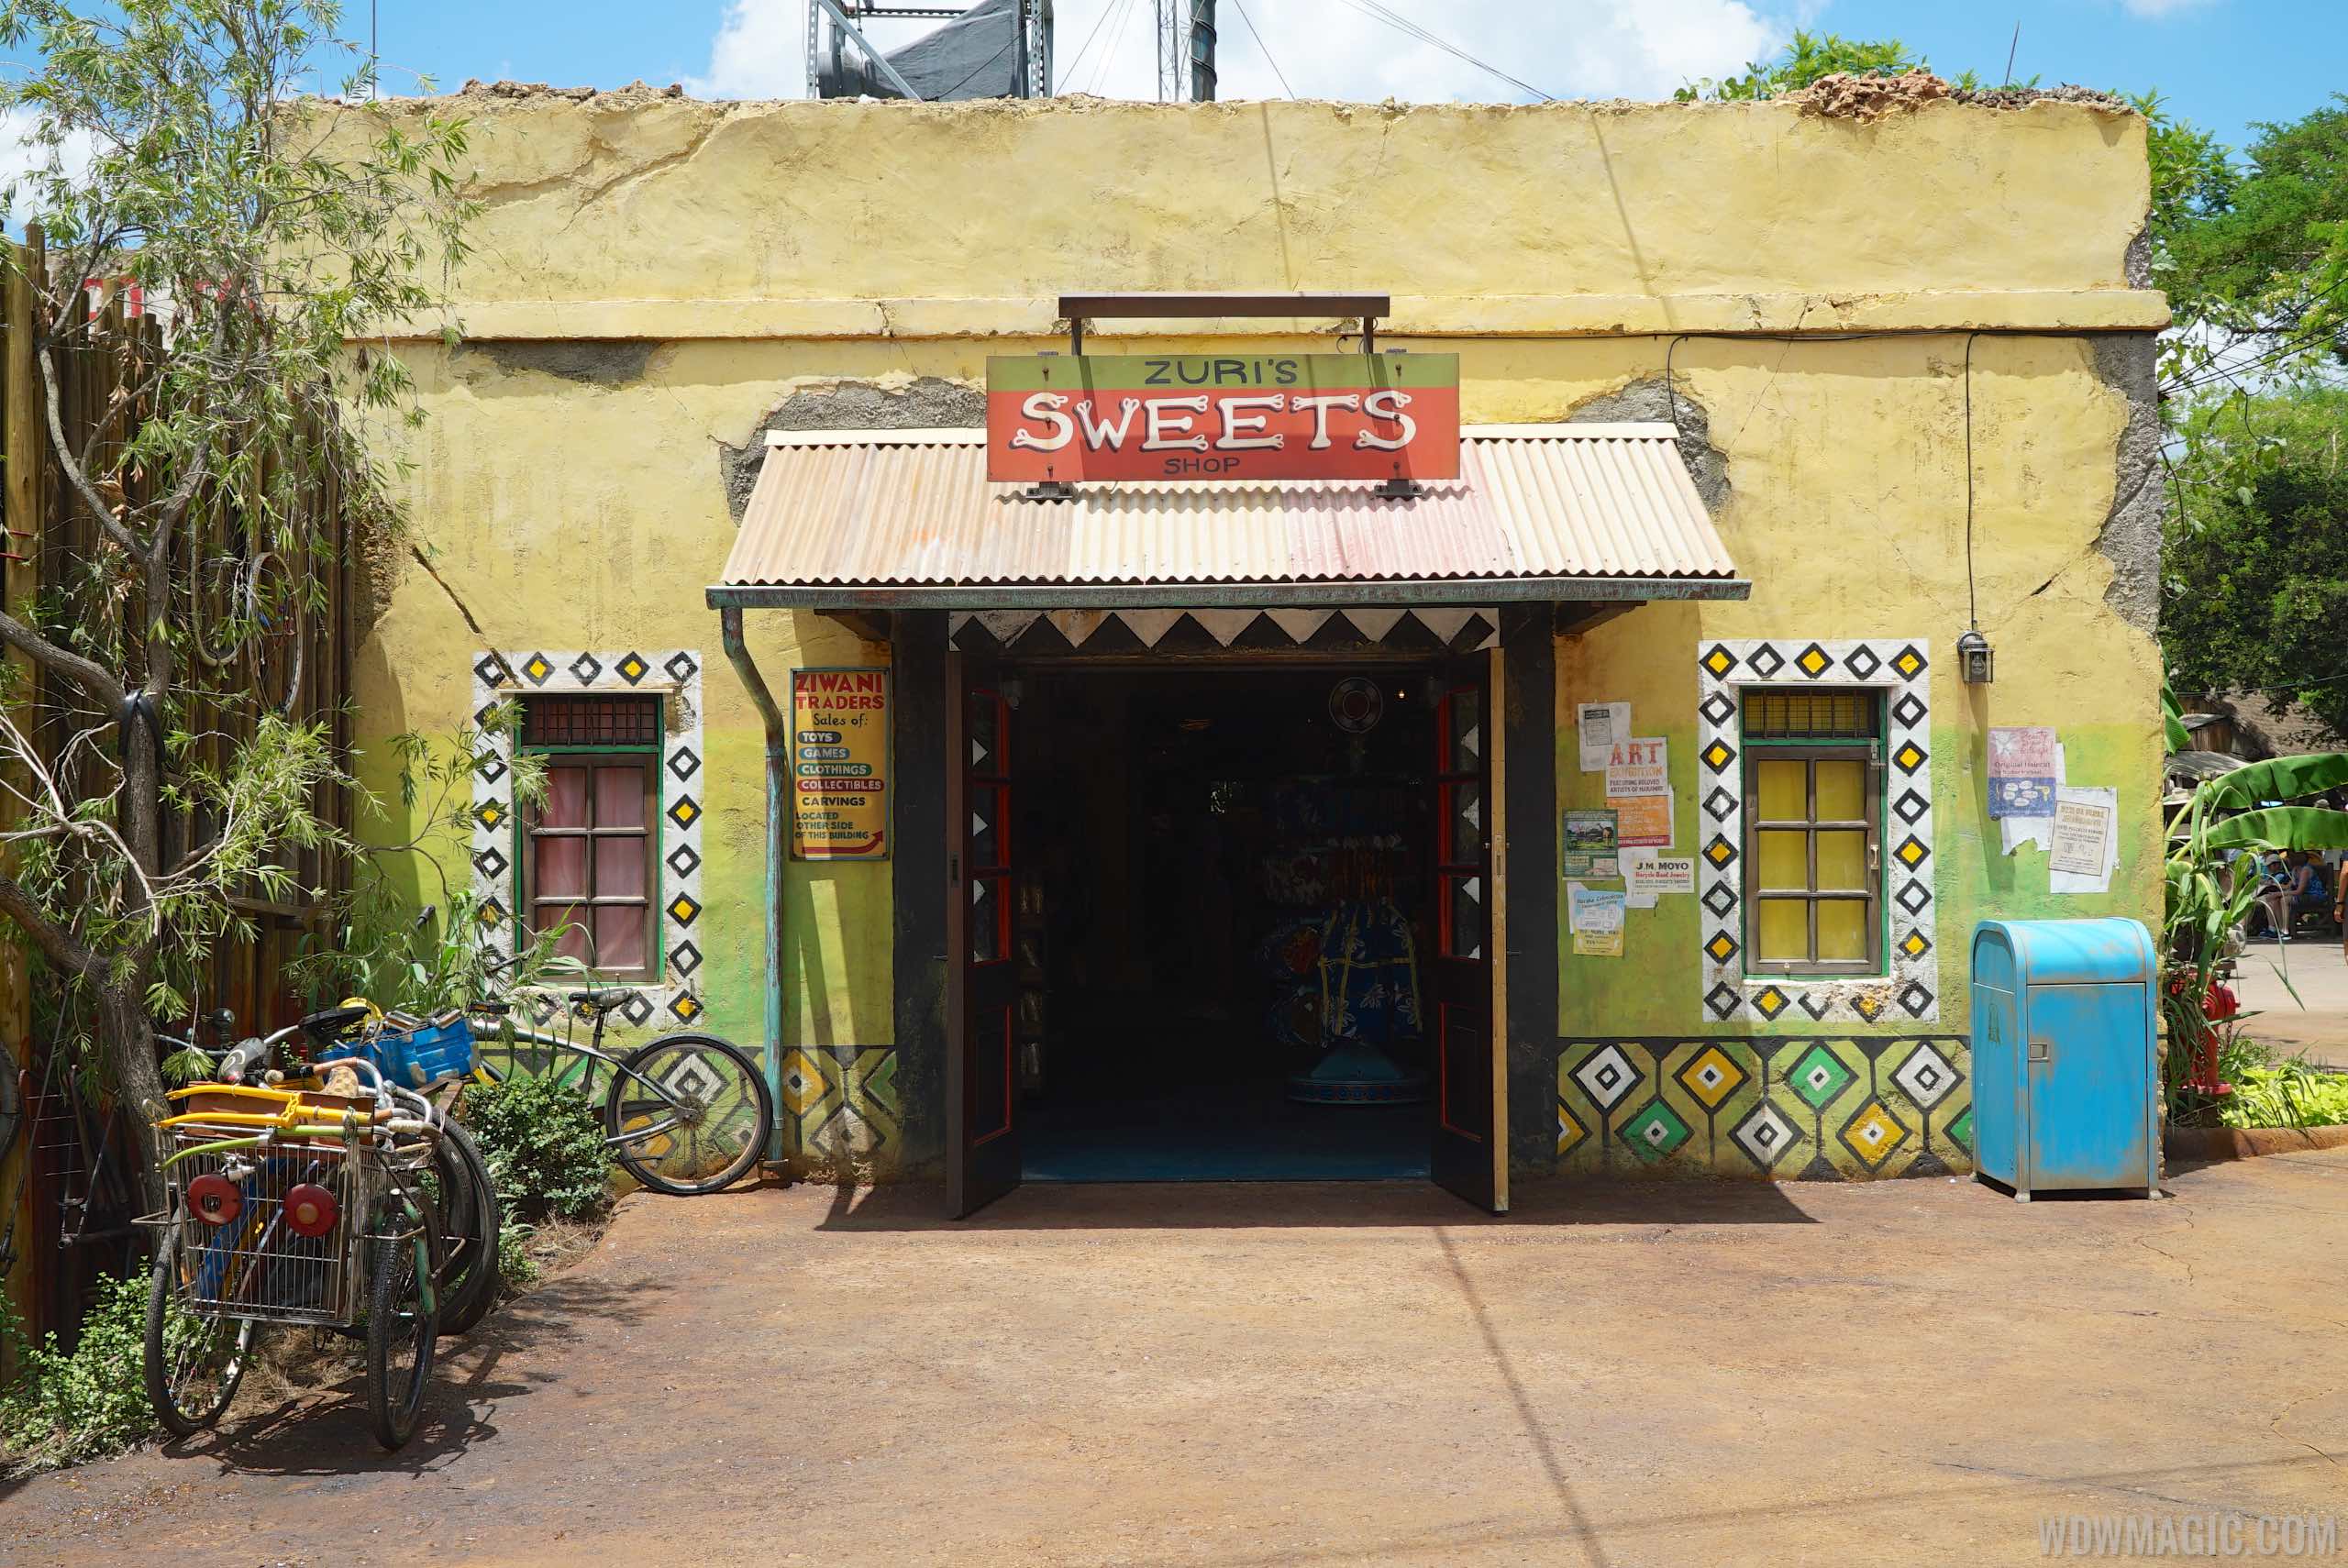 PHOTOS - A look inside the new Zuri's Sweets Shop at Disney's Animal Kingdom